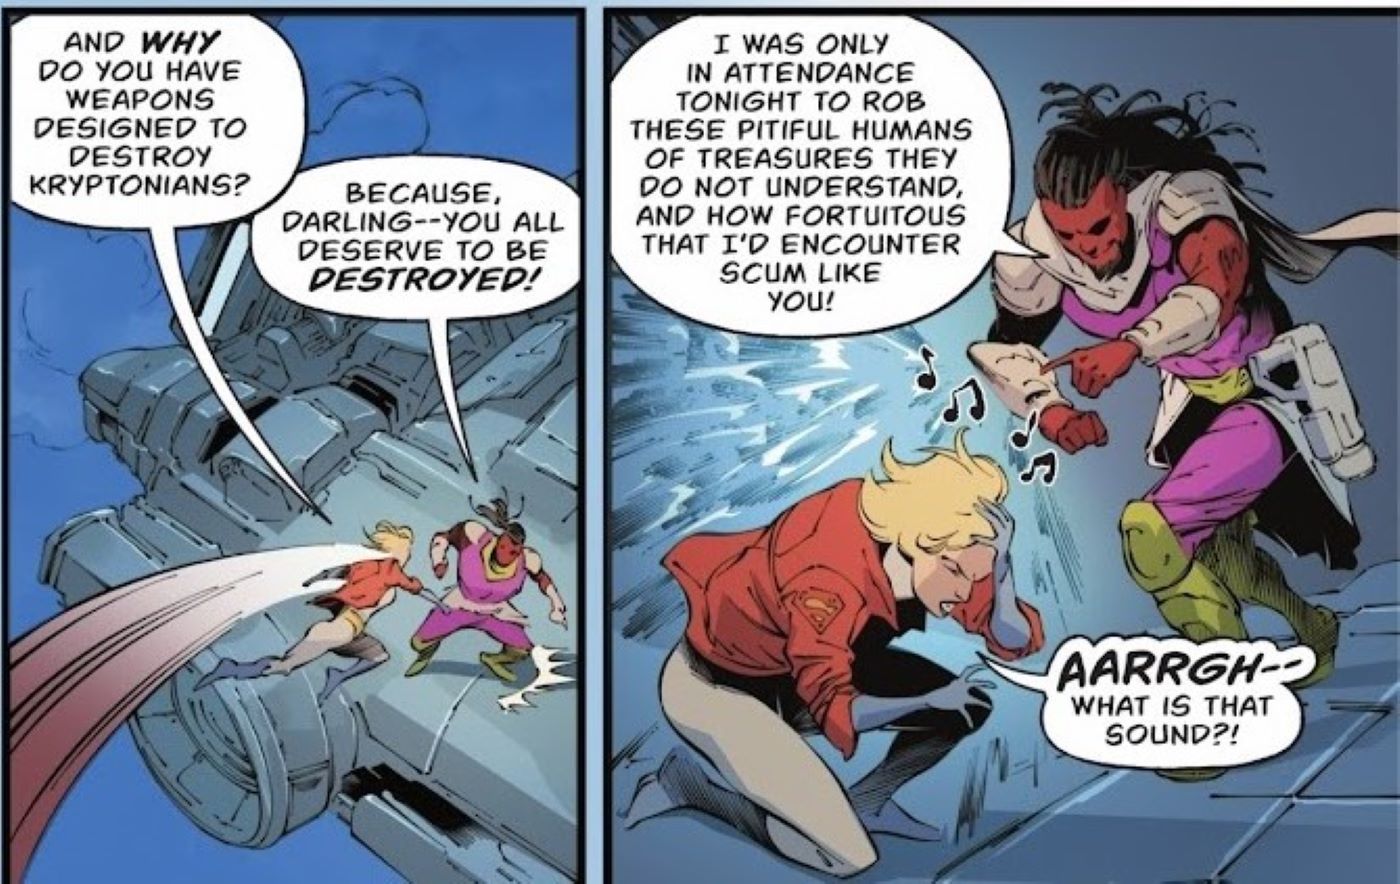 Power Girl and Amalak are battling and he is winning since he has anti-kryptonian weapons